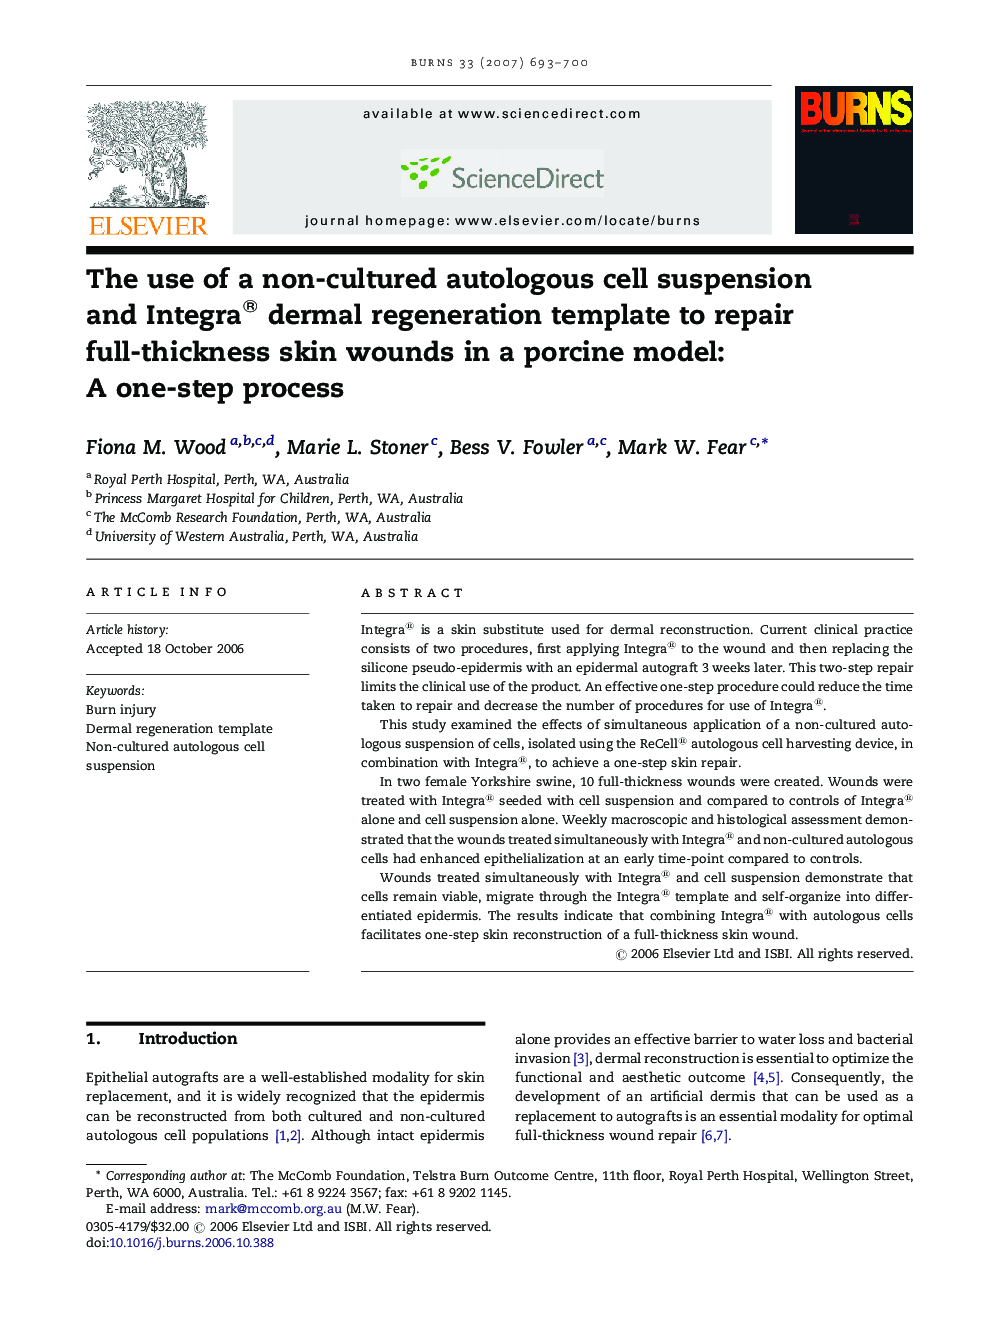 The use of a non-cultured autologous cell suspension and Integra® dermal regeneration template to repair full-thickness skin wounds in a porcine model: A one-step process